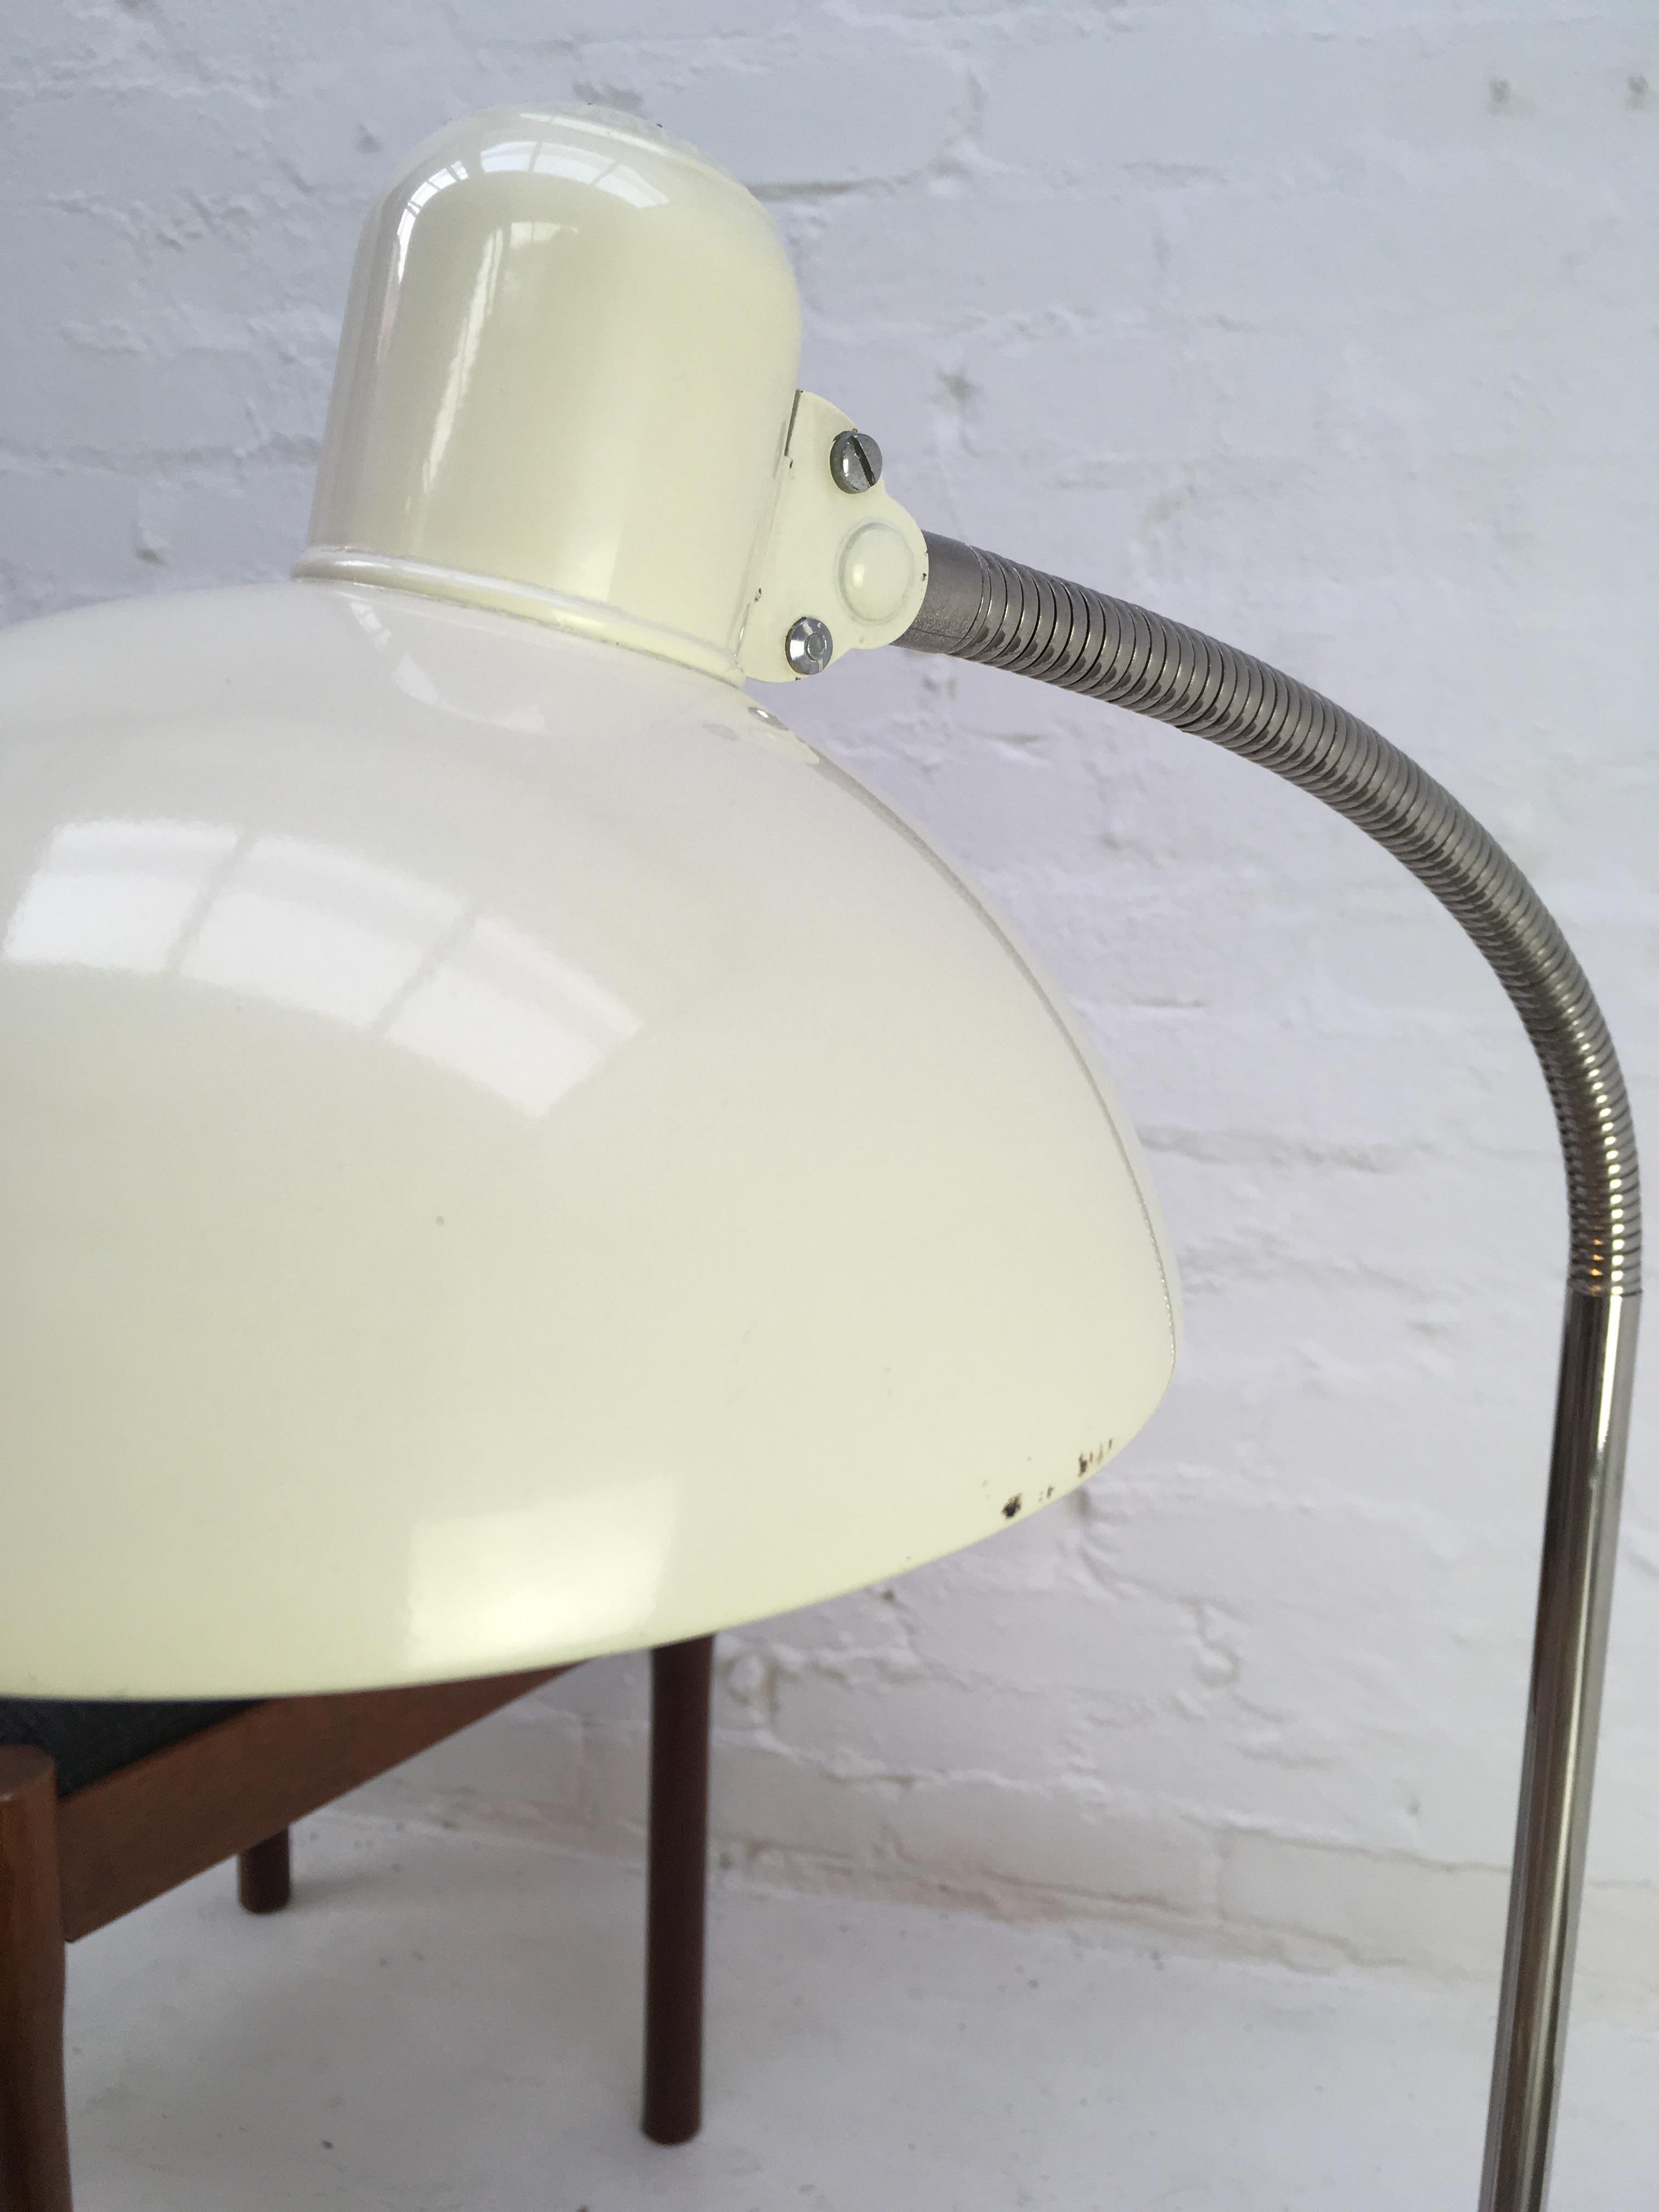 Bauhaus Christian Dell Kaiser Idell 6740 Task Lamp with Clamp, Germany, 1930s